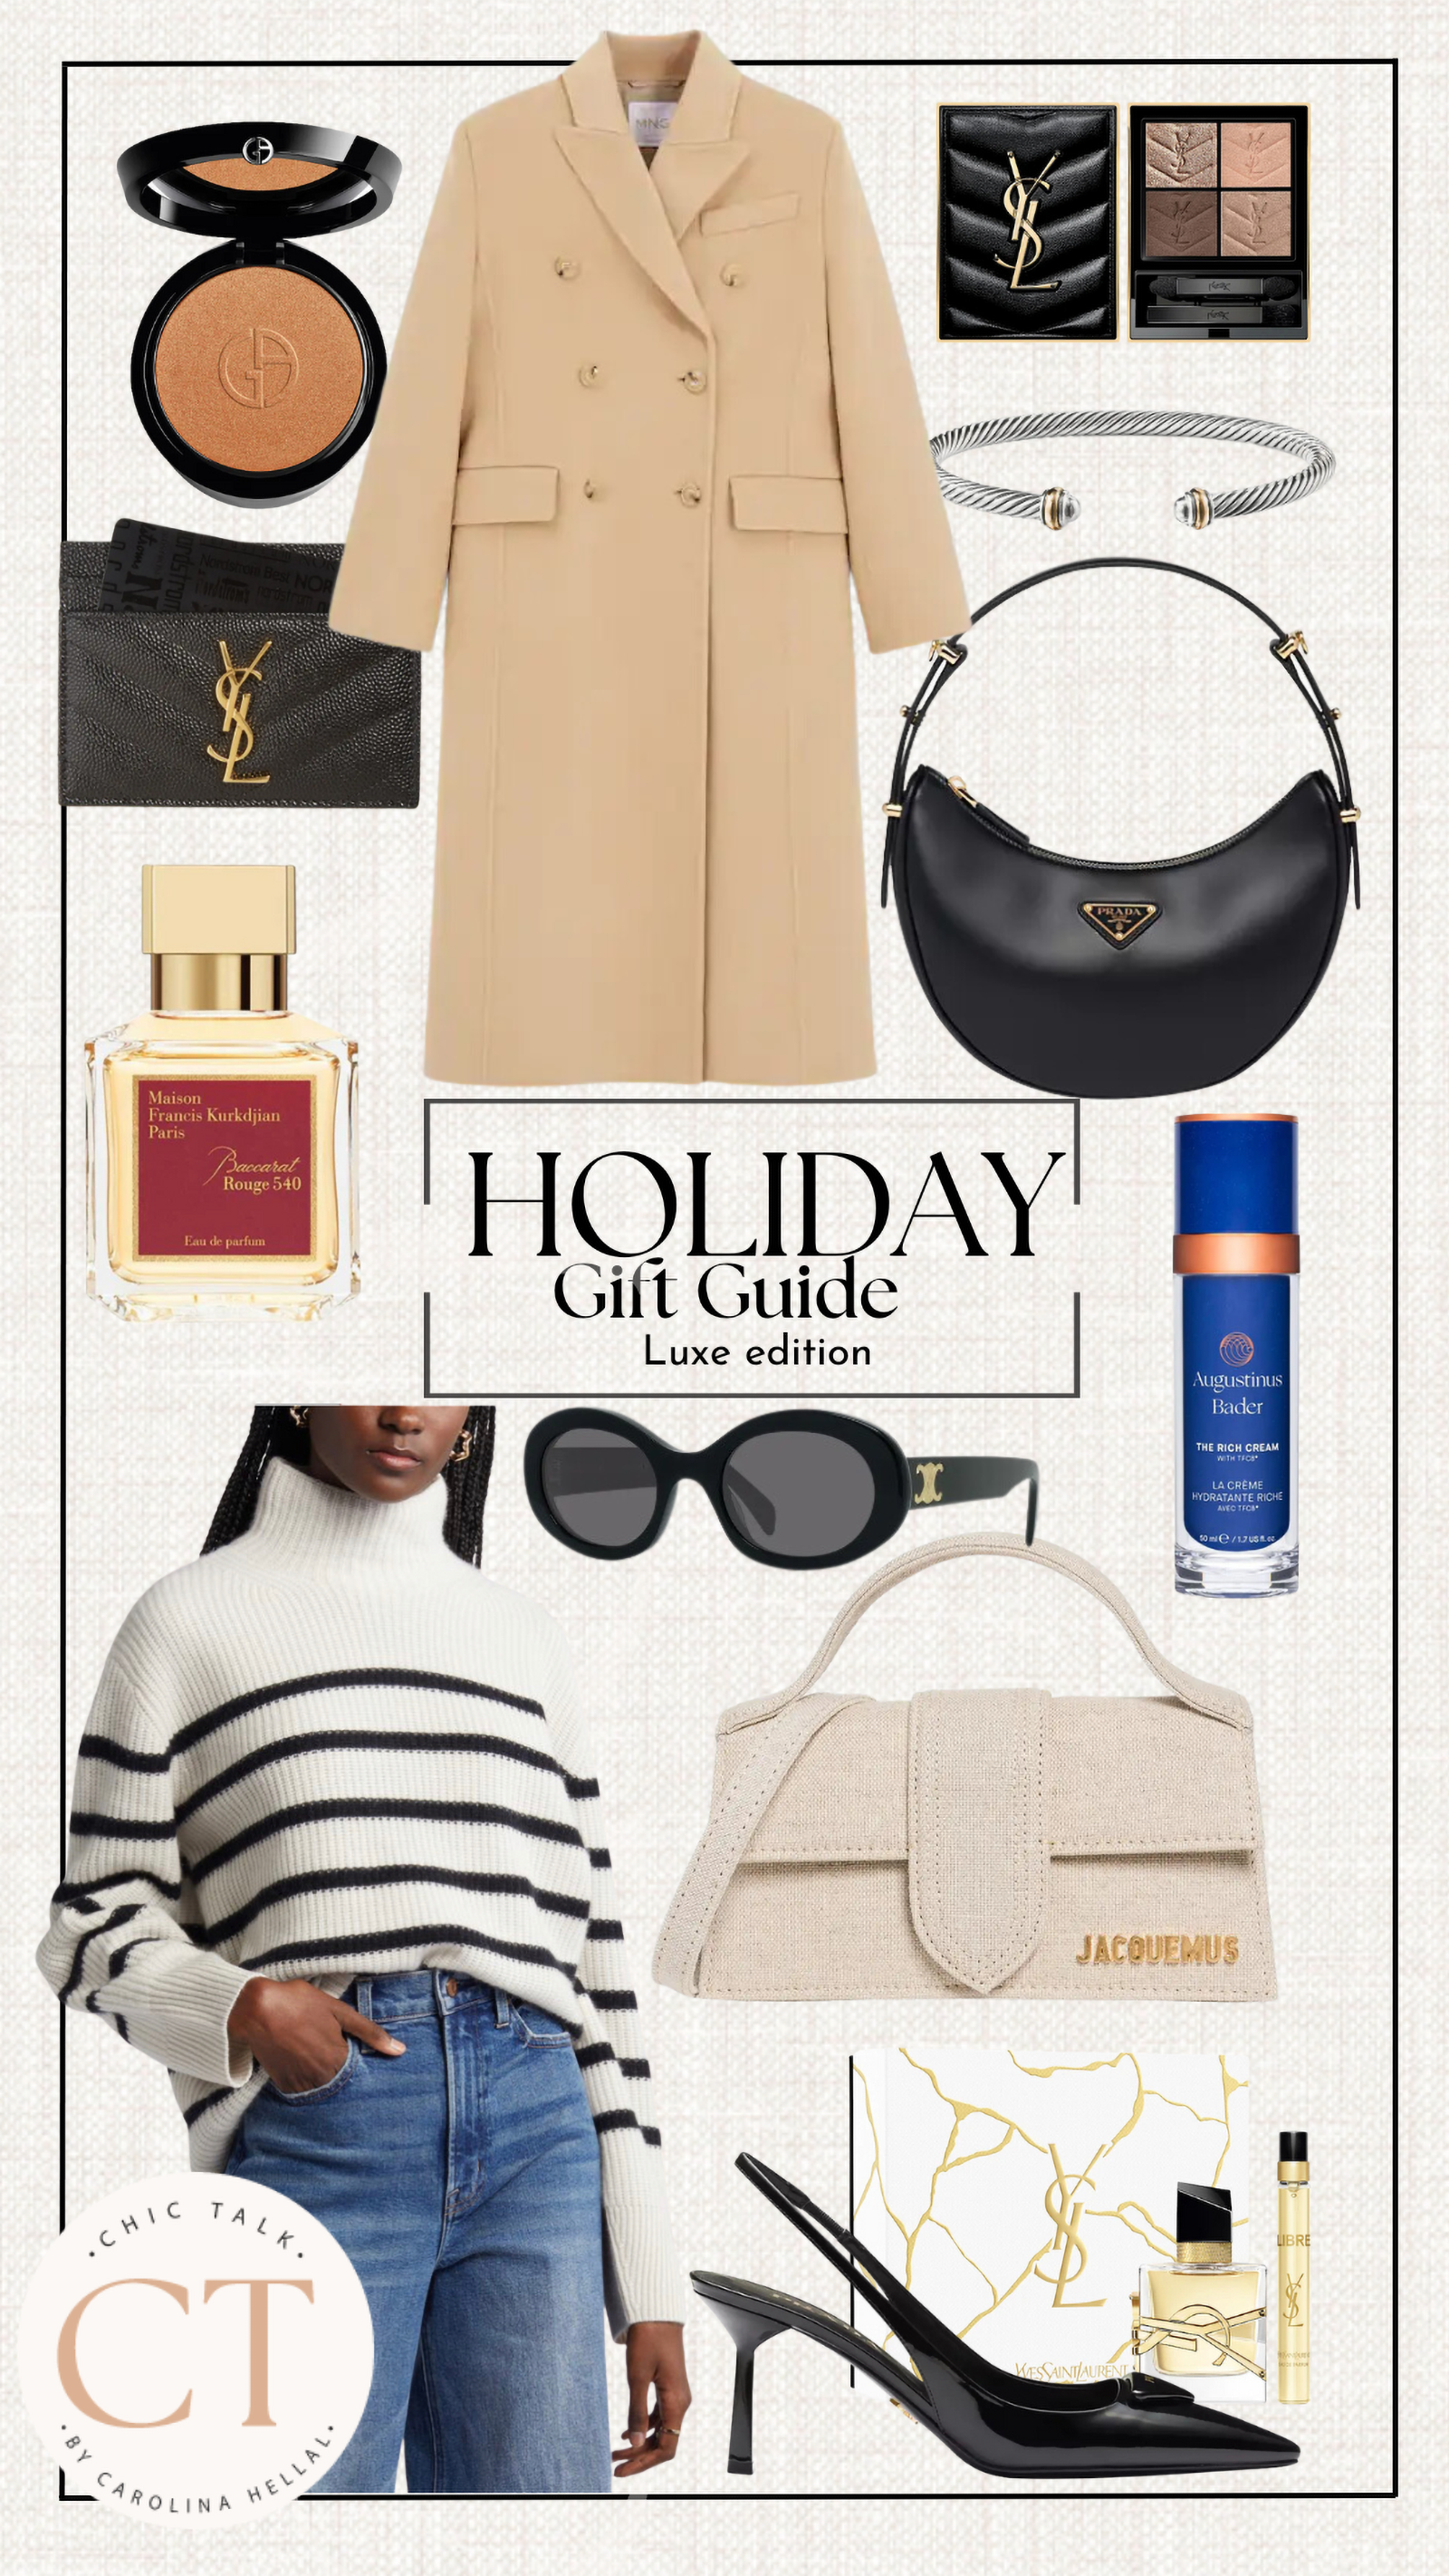 Holiday Gift Guide Luxe Edition Chic Talk